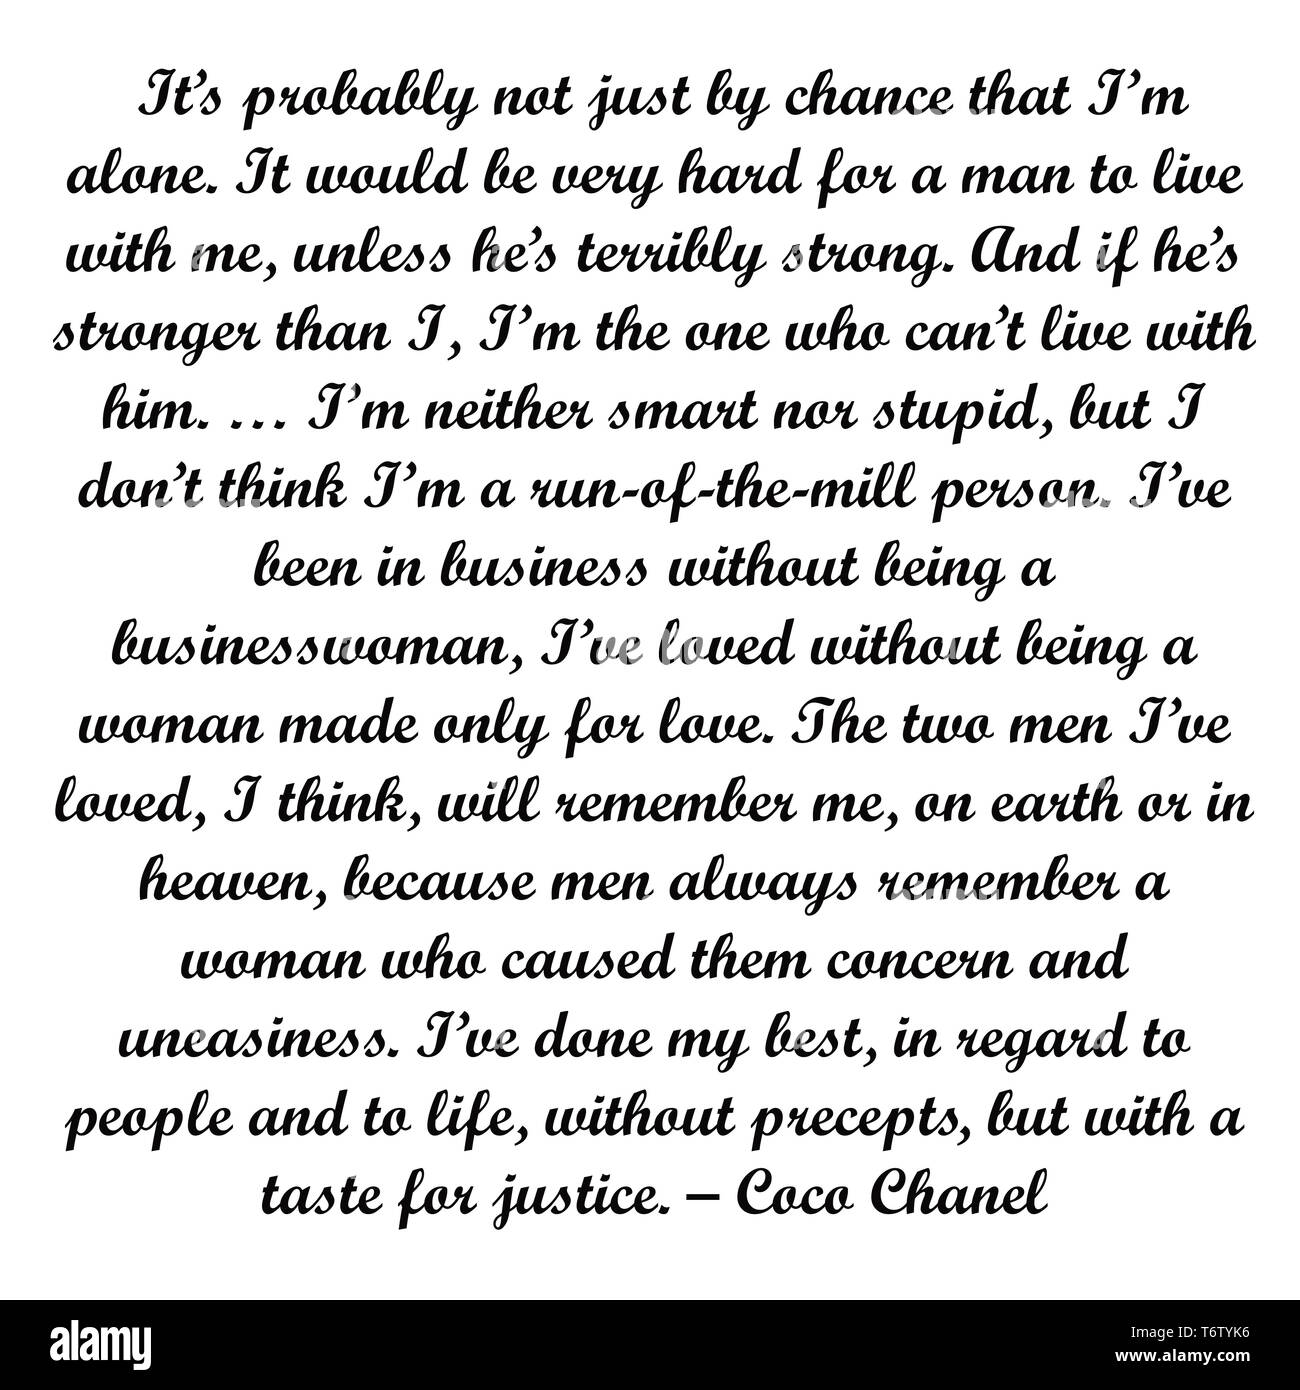 Best Coco Chanel quotes